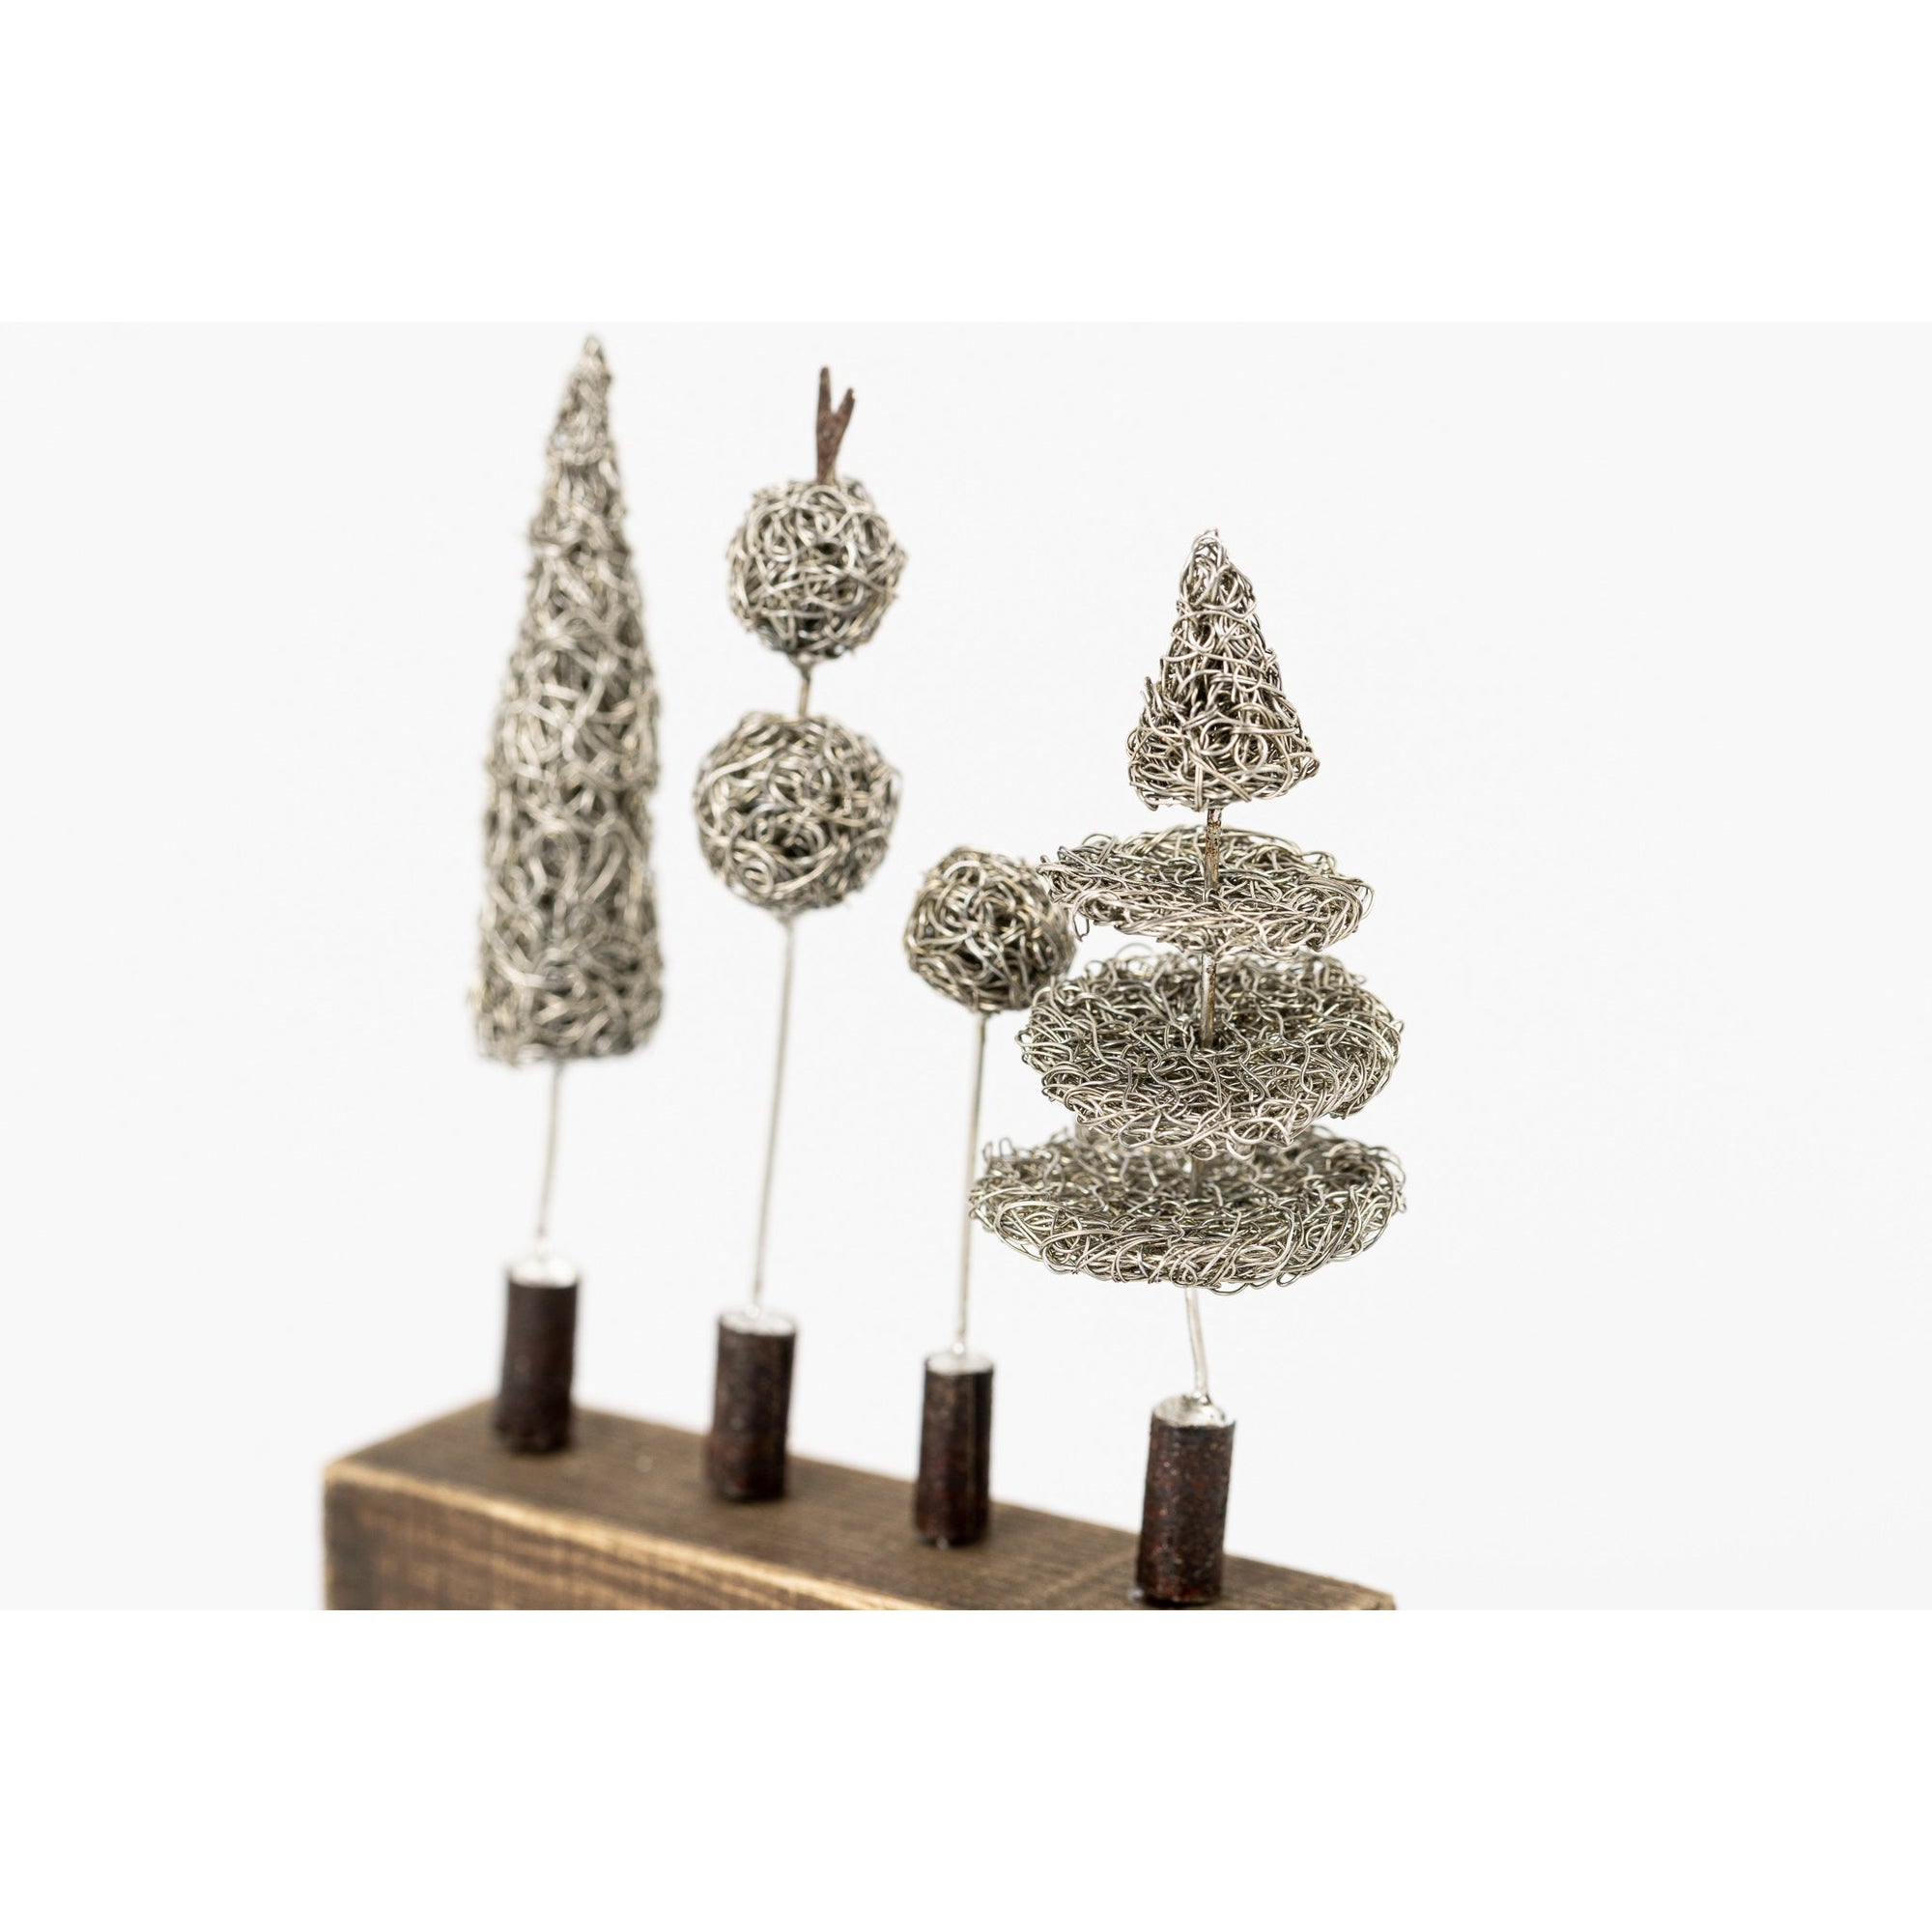 Mini Topiary by Sarah Jane Brown available at Padstow Gallery, Cornwall